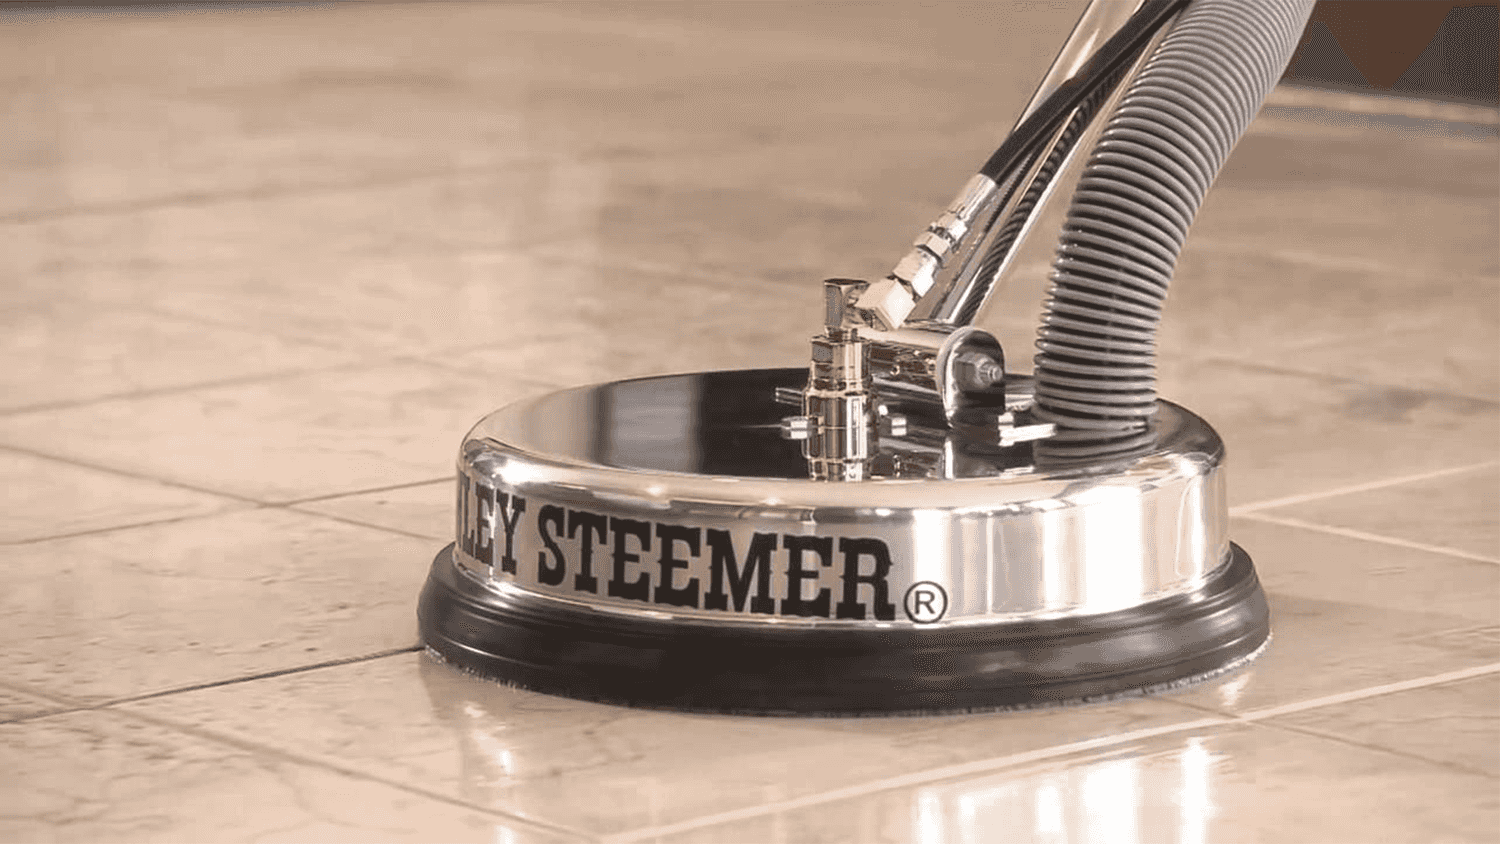 A Stanley Steemer cleaning machine